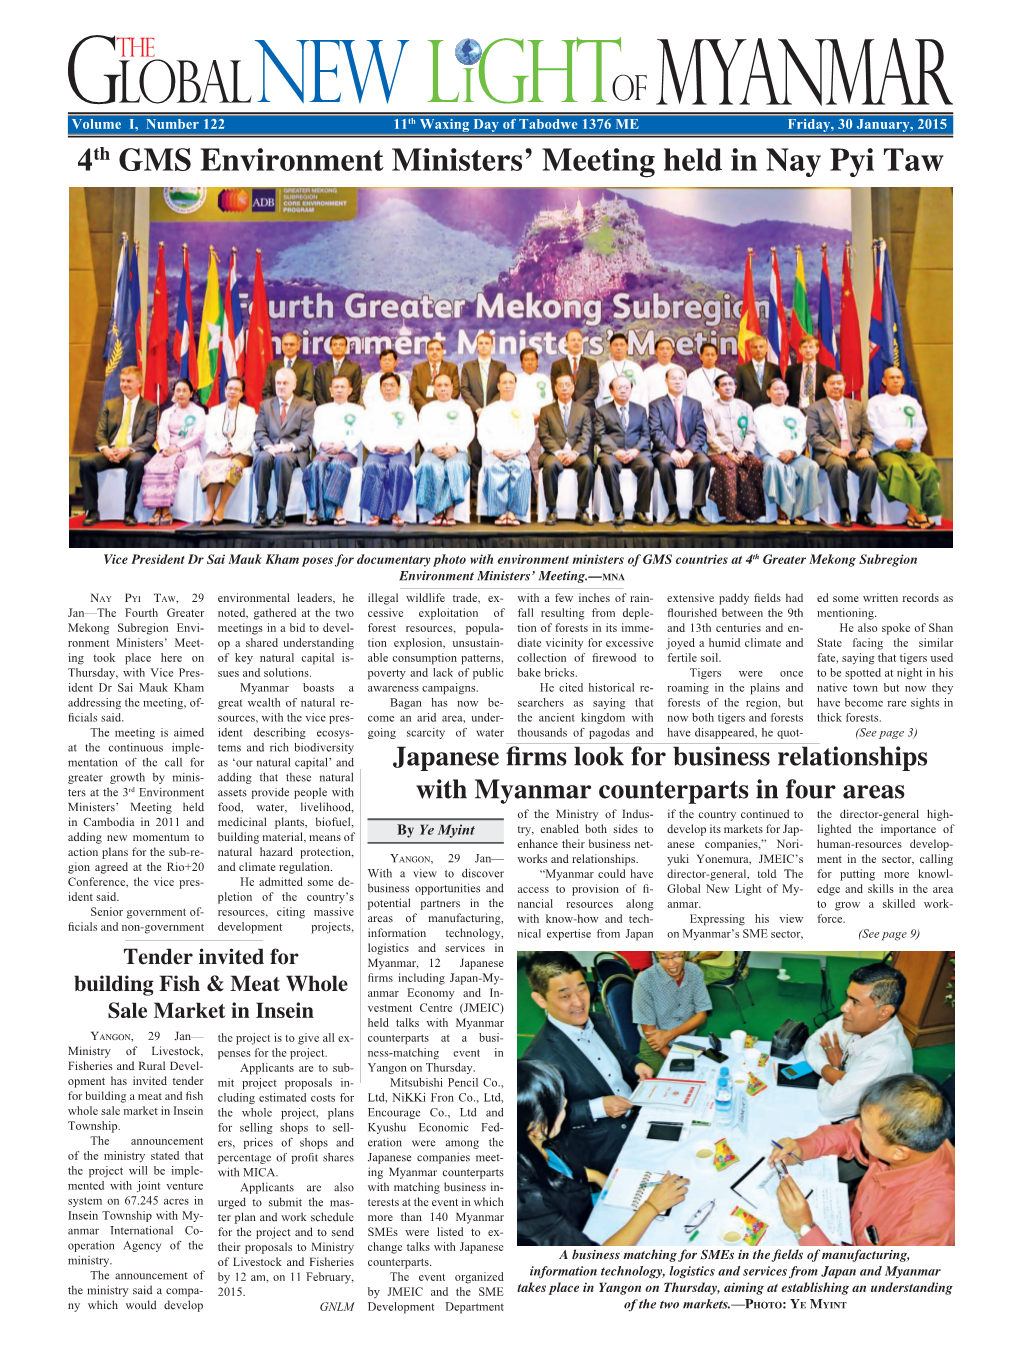 4Th GMS Environment Ministers' Meeting Held in Nay Pyi